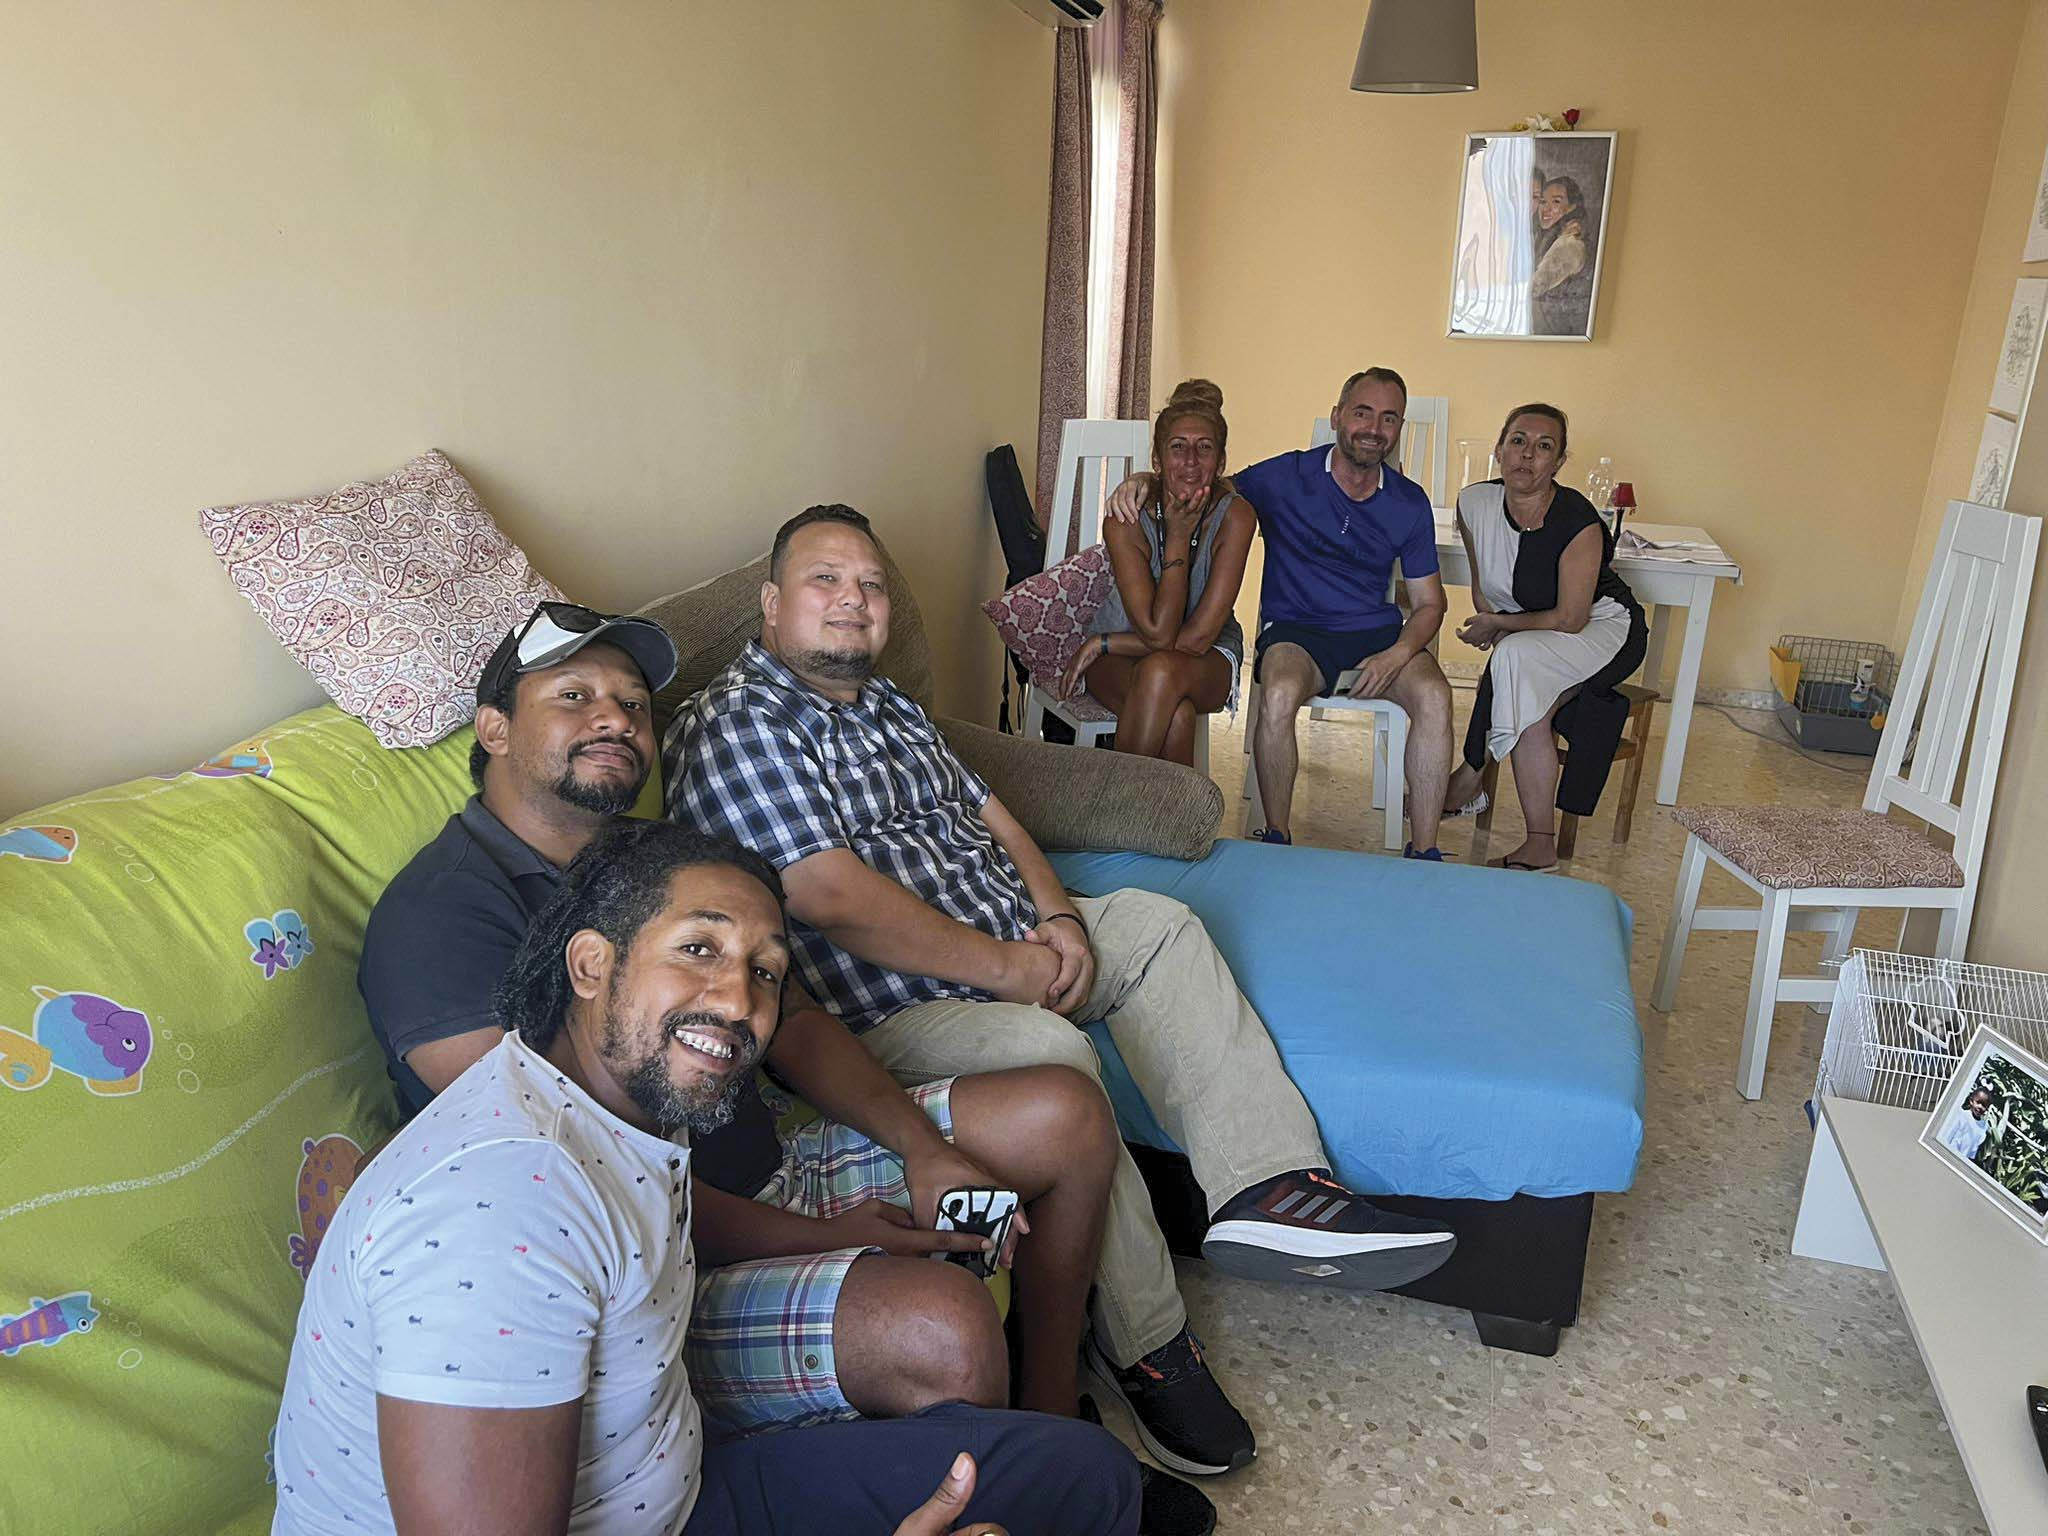 Christians in Spain meeting with one another in a small apartment